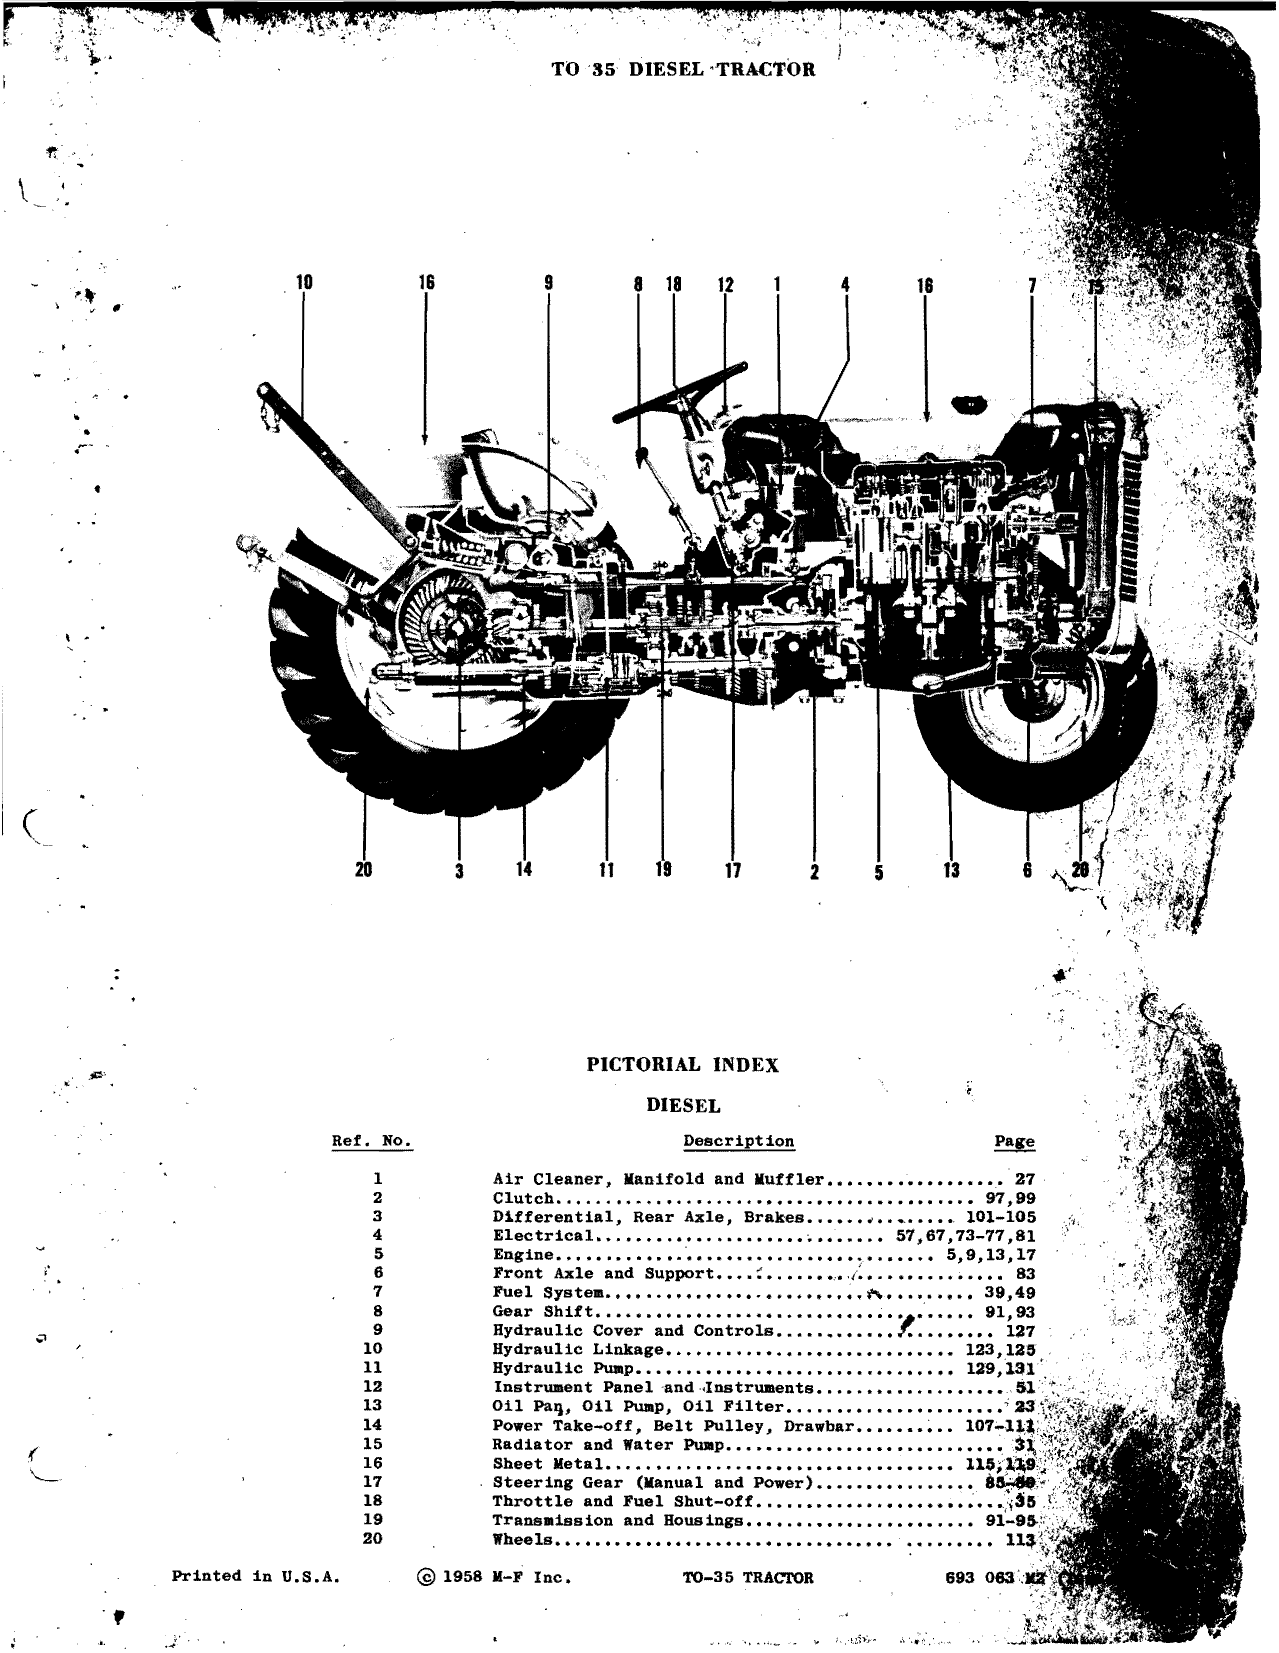 1954-1960 Massey Ferguson TO 35 gas & diesel parts manual Preview image 5